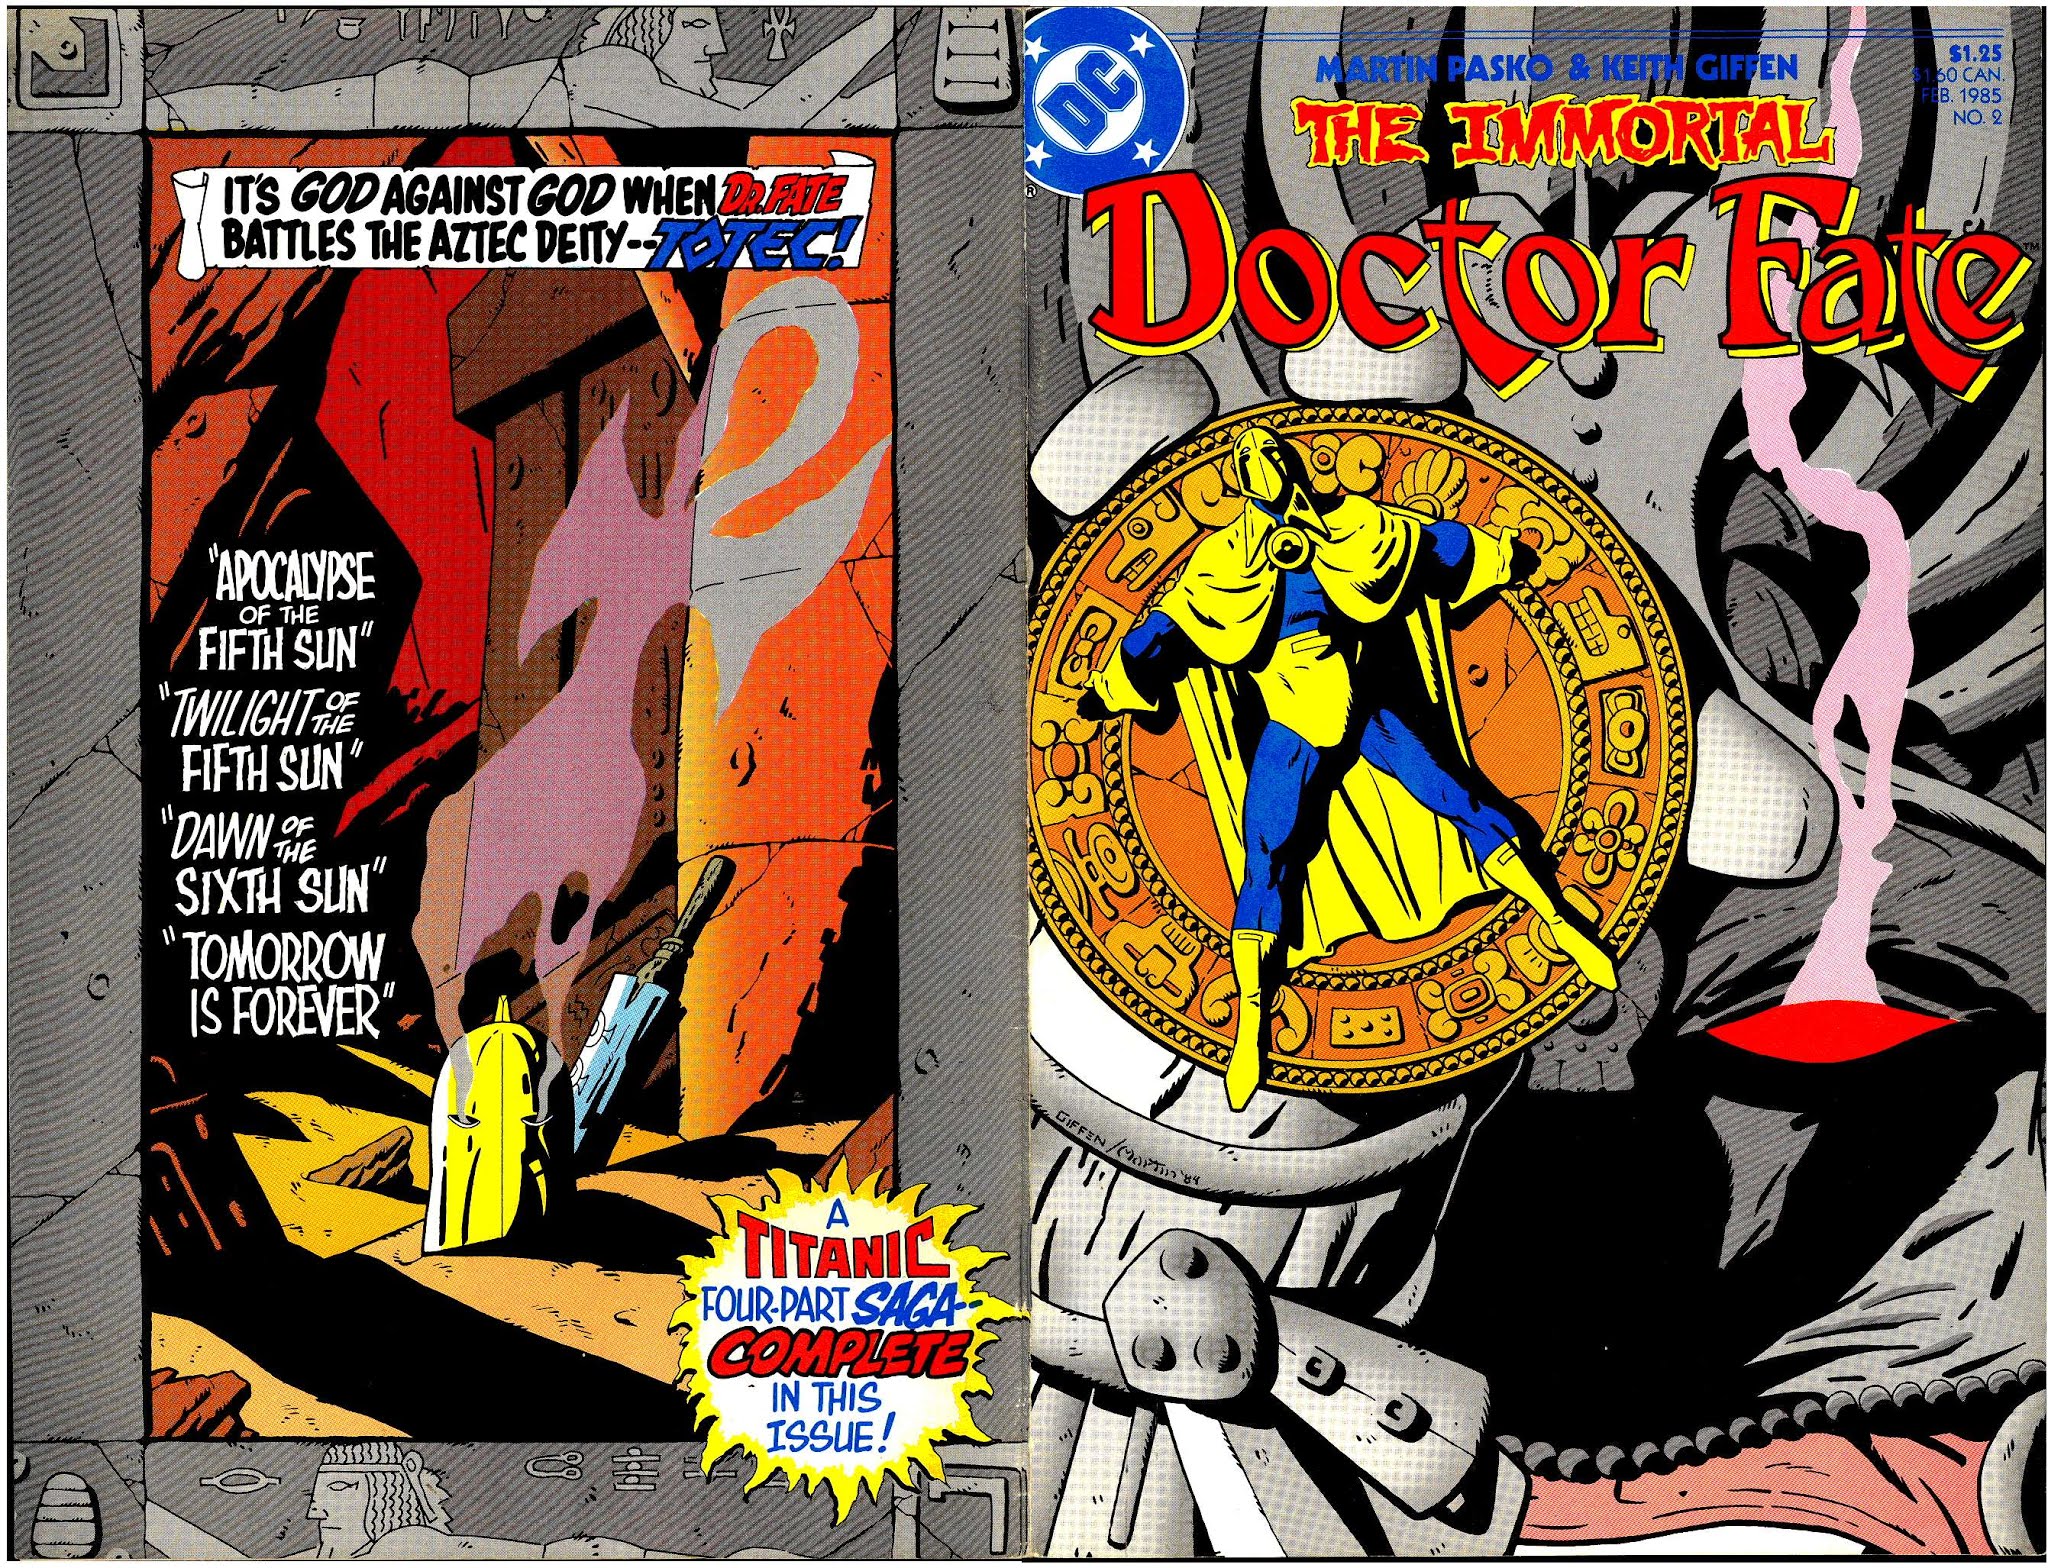 Read online The Immortal Doctor Fate comic -  Issue #2 - 1